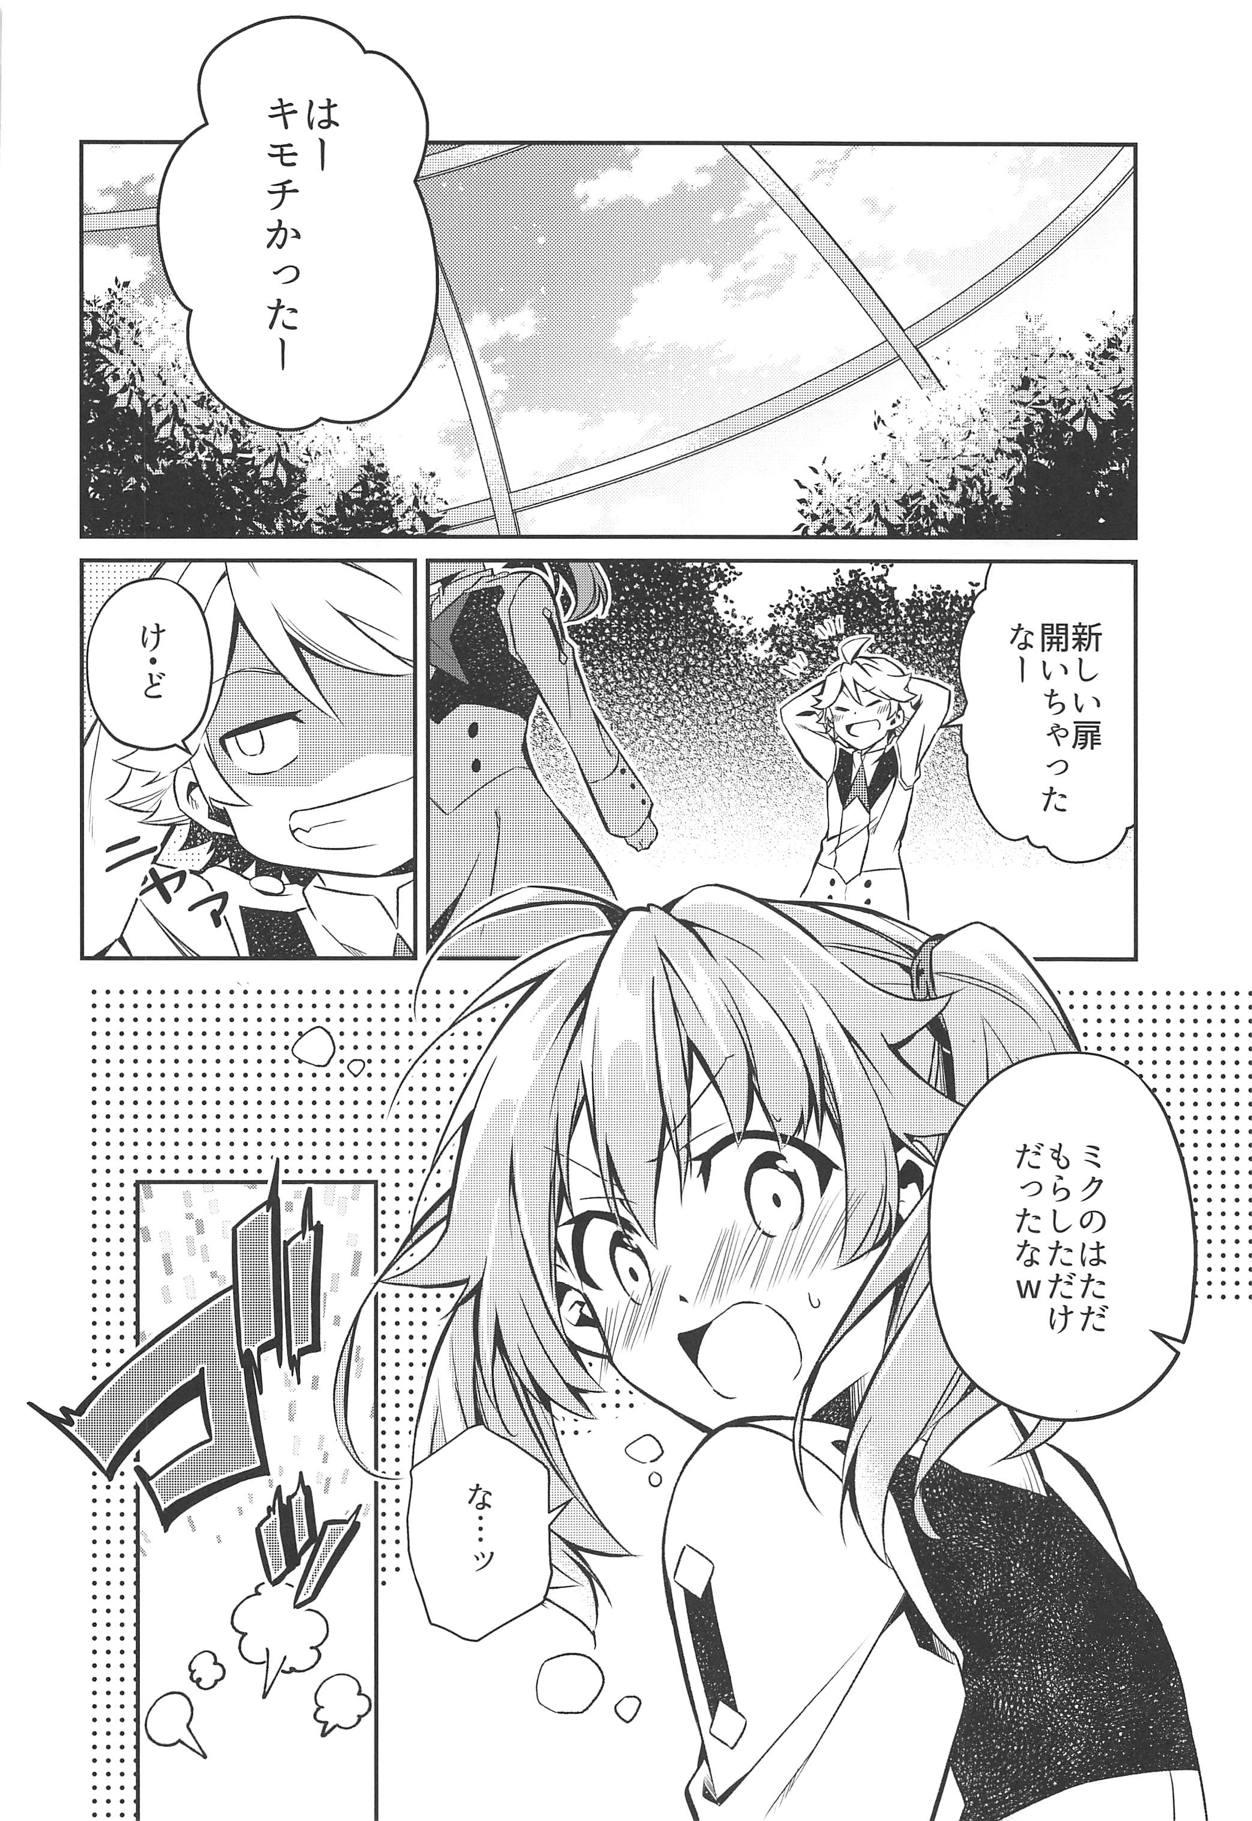 Finger KISS OF EROS - Darling in the franxx Passion - Page 11